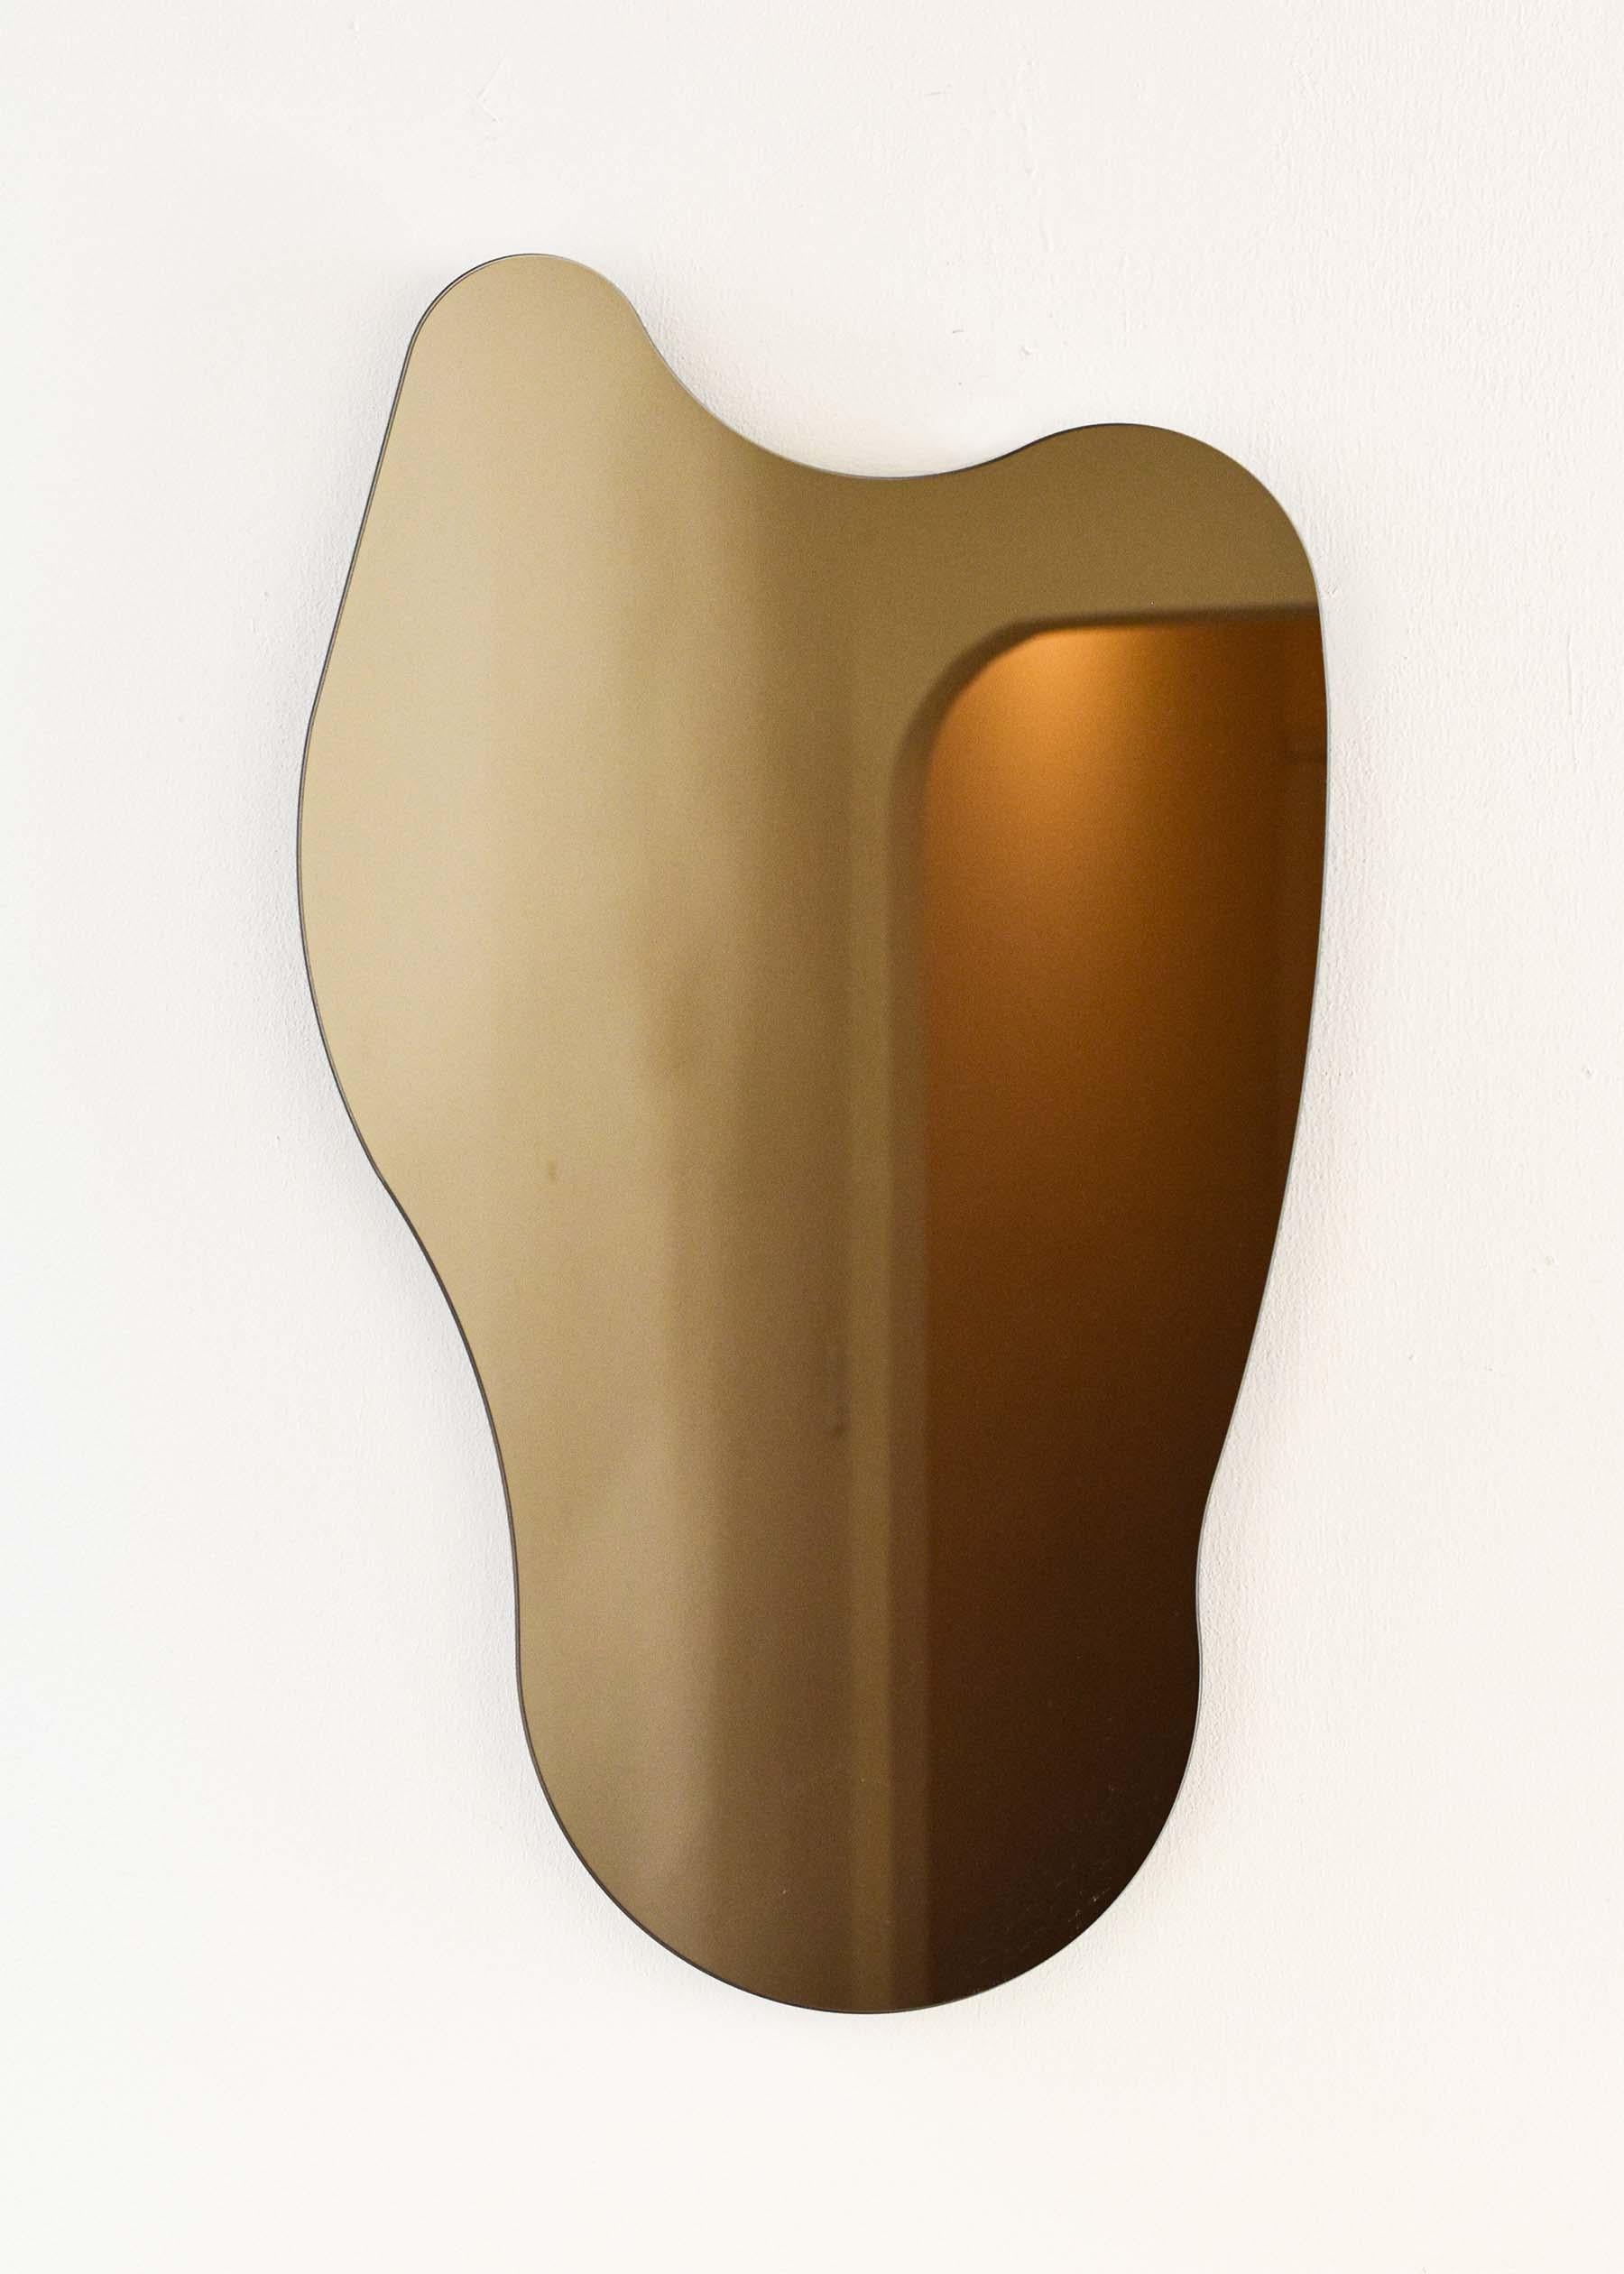 CHARLIE MIRROR
Materials: Bronze Glass, Black MDF
Dimensions: 19”W X .75”D X 31.75”H 

Minimalist, elegant, amorphically shaped floating bronze glass mirrors inspired by the topography of the Philippine archipelago. 

Artist Cheyenne Concepcion